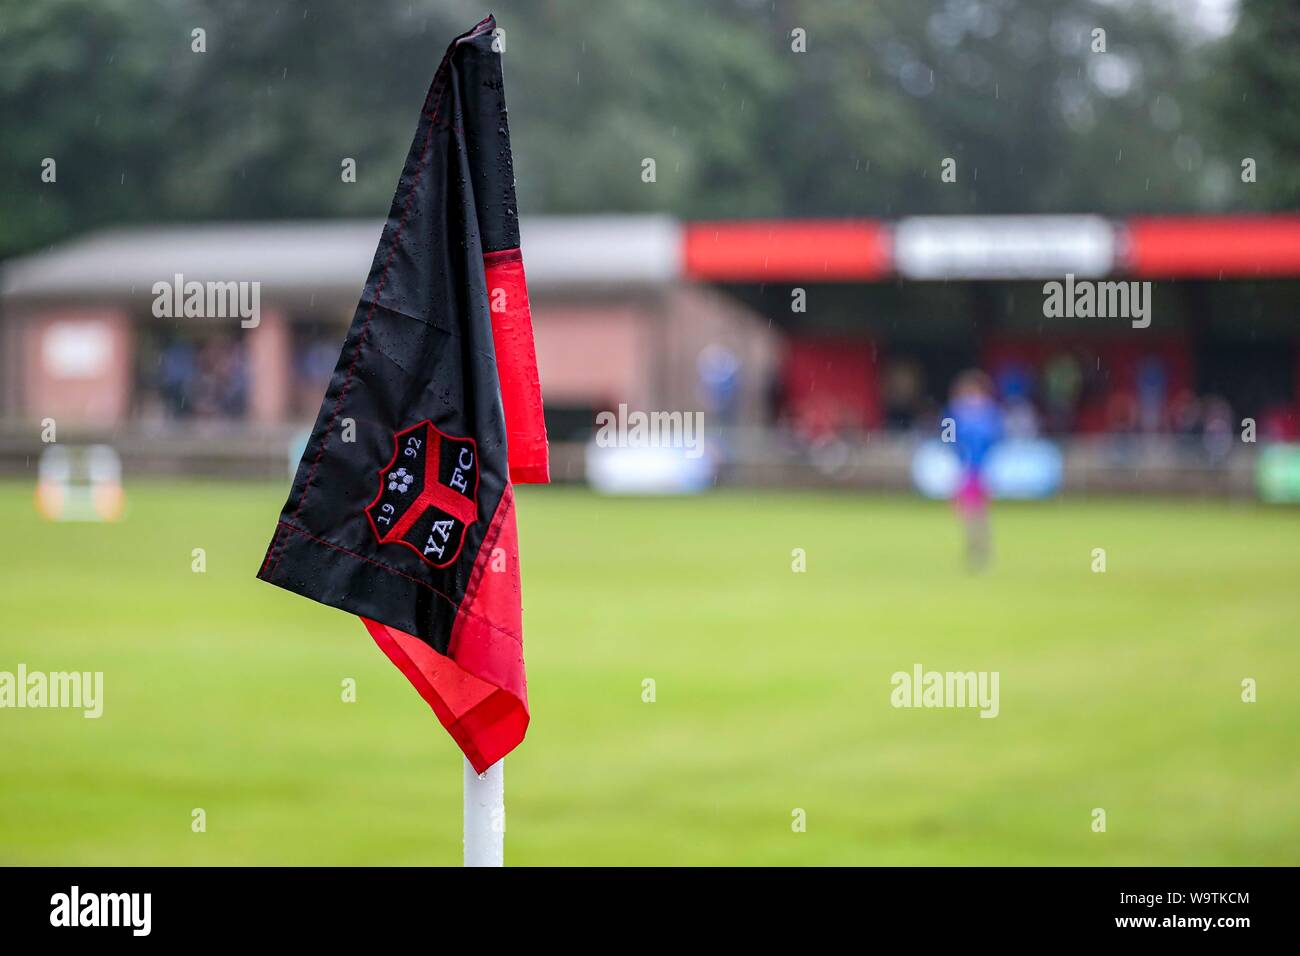 PORTH, UNITED KINGDOM. 14th Aug 2019. Ynyshir Albions 3-0 victory against AFC Porth during their Welsh Football League Division Two football match. © Photo Matthew Lofthouse - Freelance Photographer Stock Photo